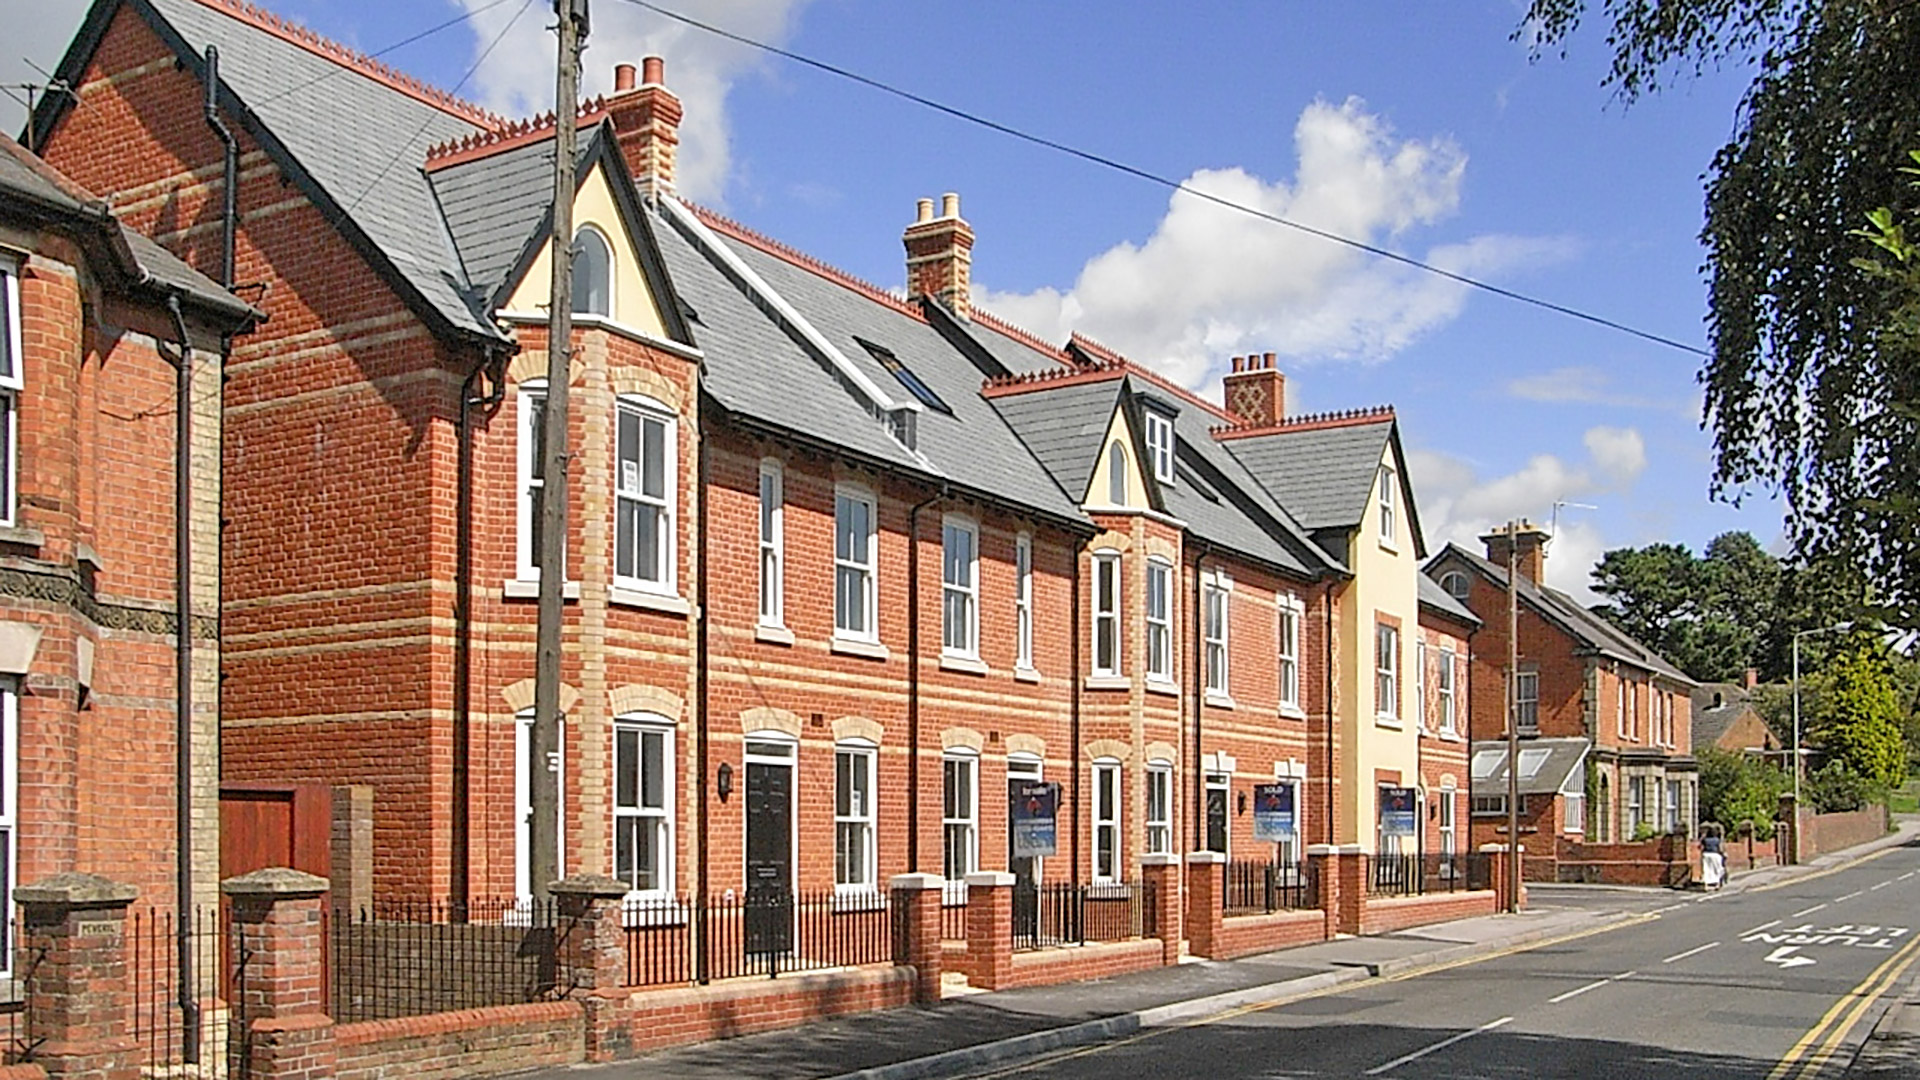 road view of attractive town houses in red brick